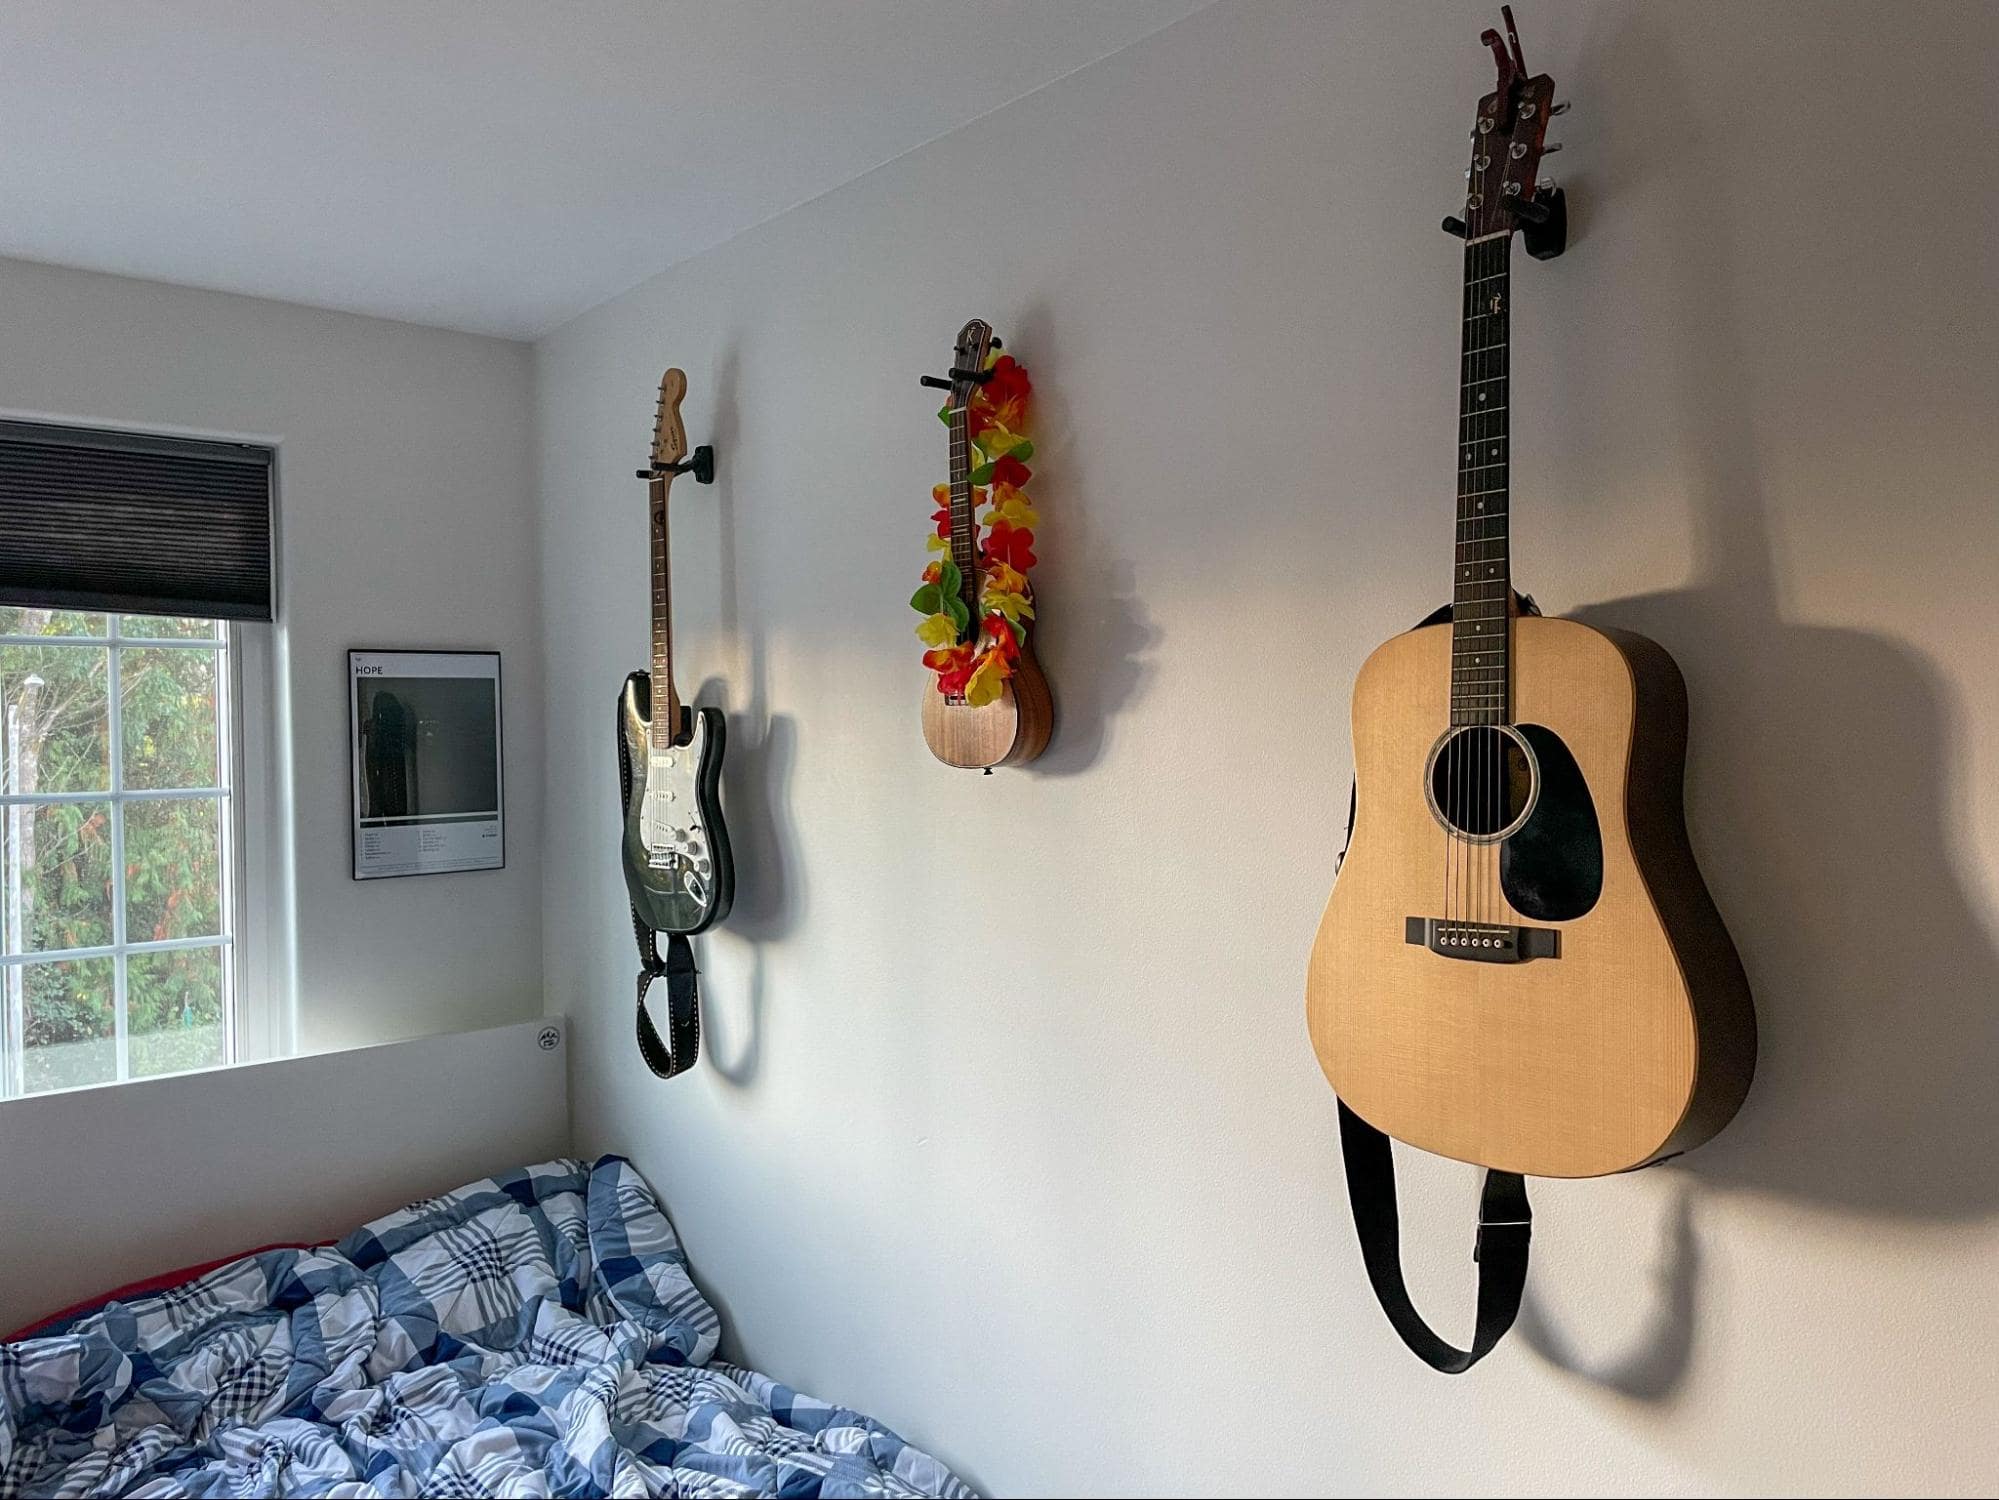 Guitars hung on a white wall above a bed with blue and white bedding, next to a window with a view of greenery outside